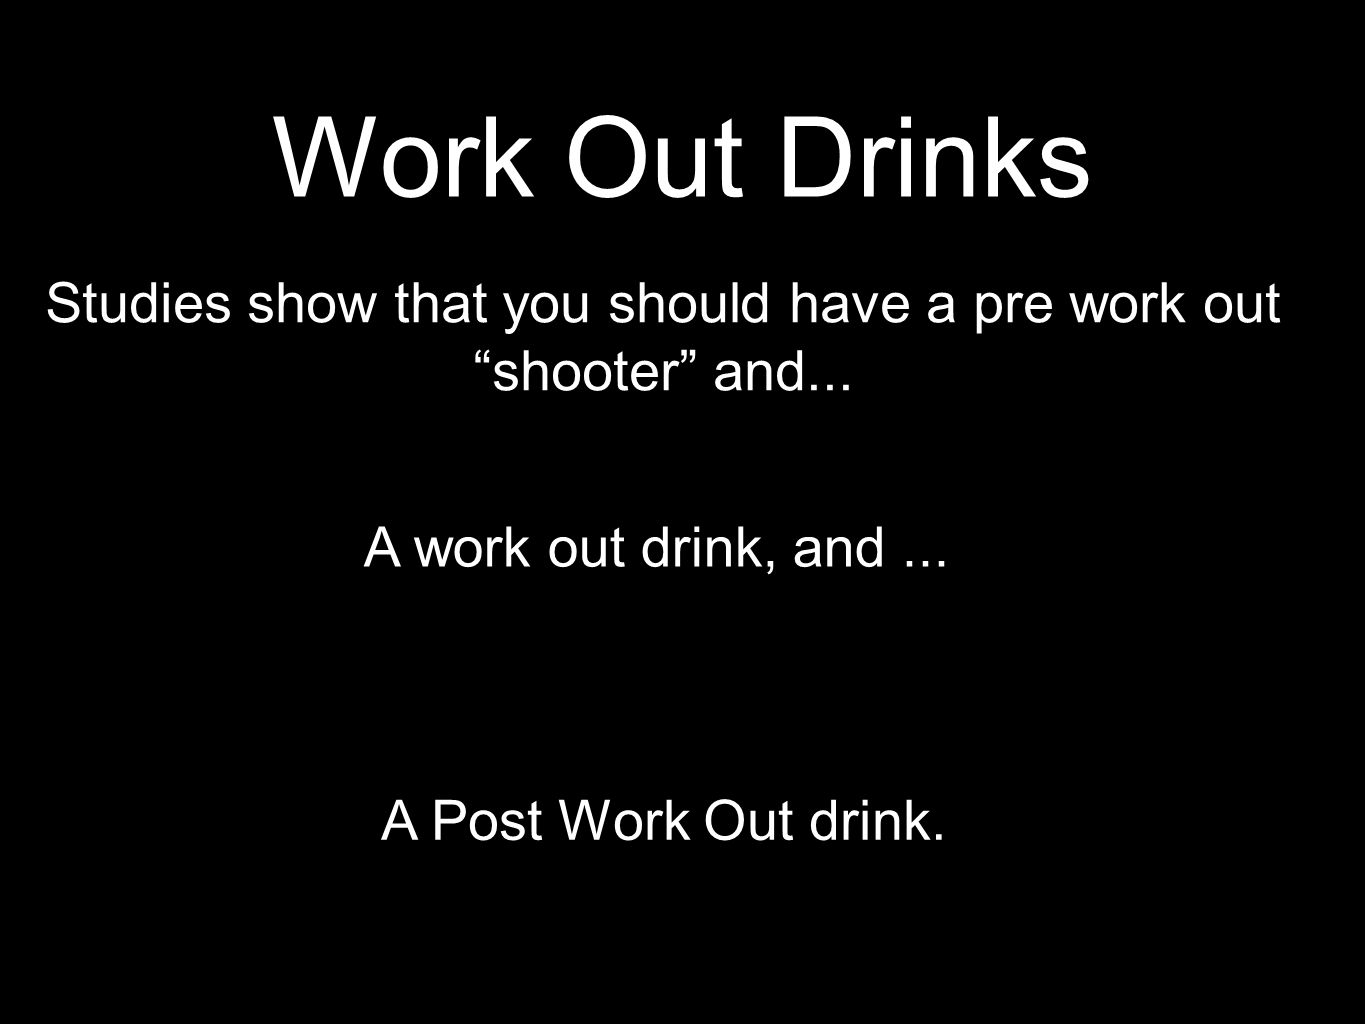 Work Out Drinks A work out drink, and...